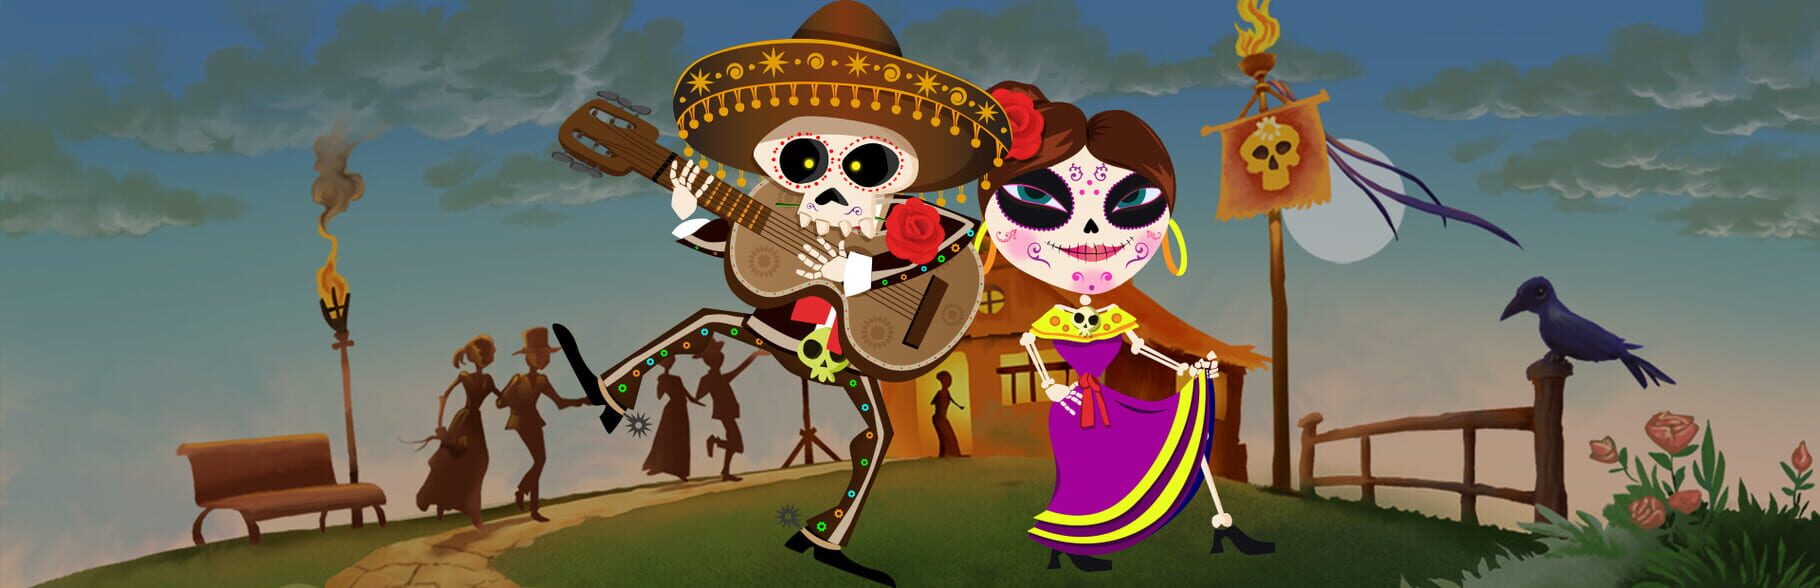 Day of the Dead: Solitaire Collection artwork